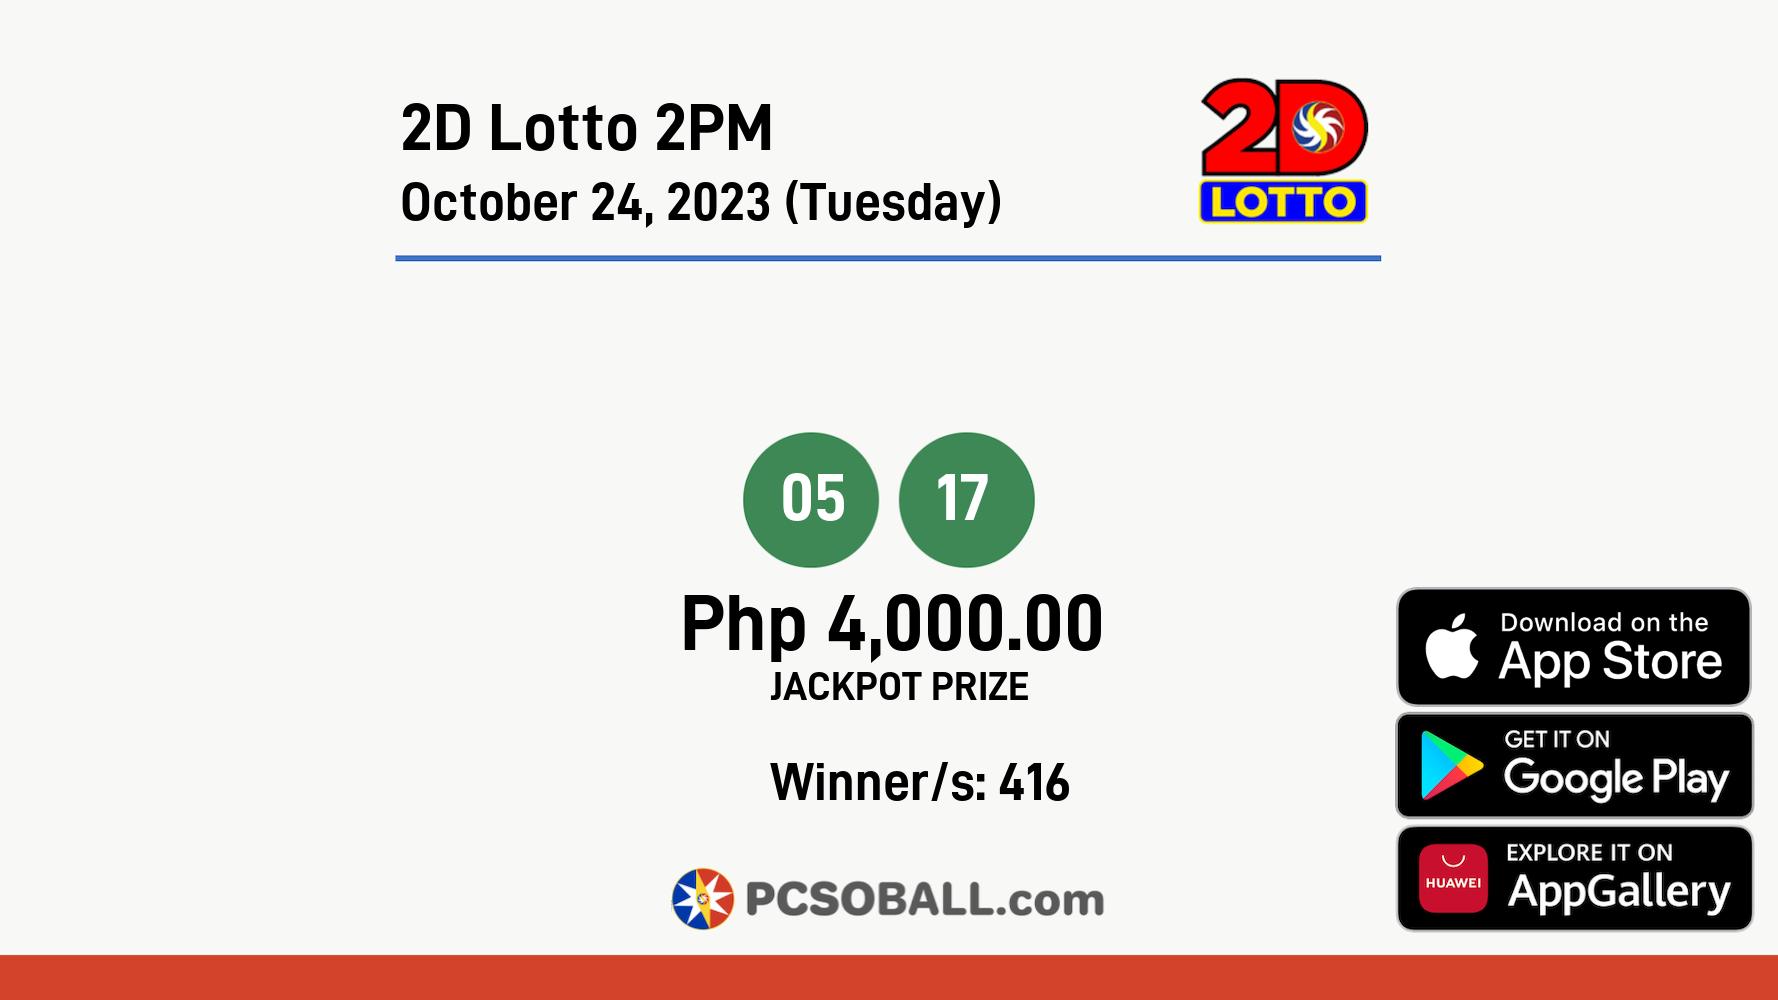 2D Lotto 2PM October 24, 2023 (Tuesday) Result